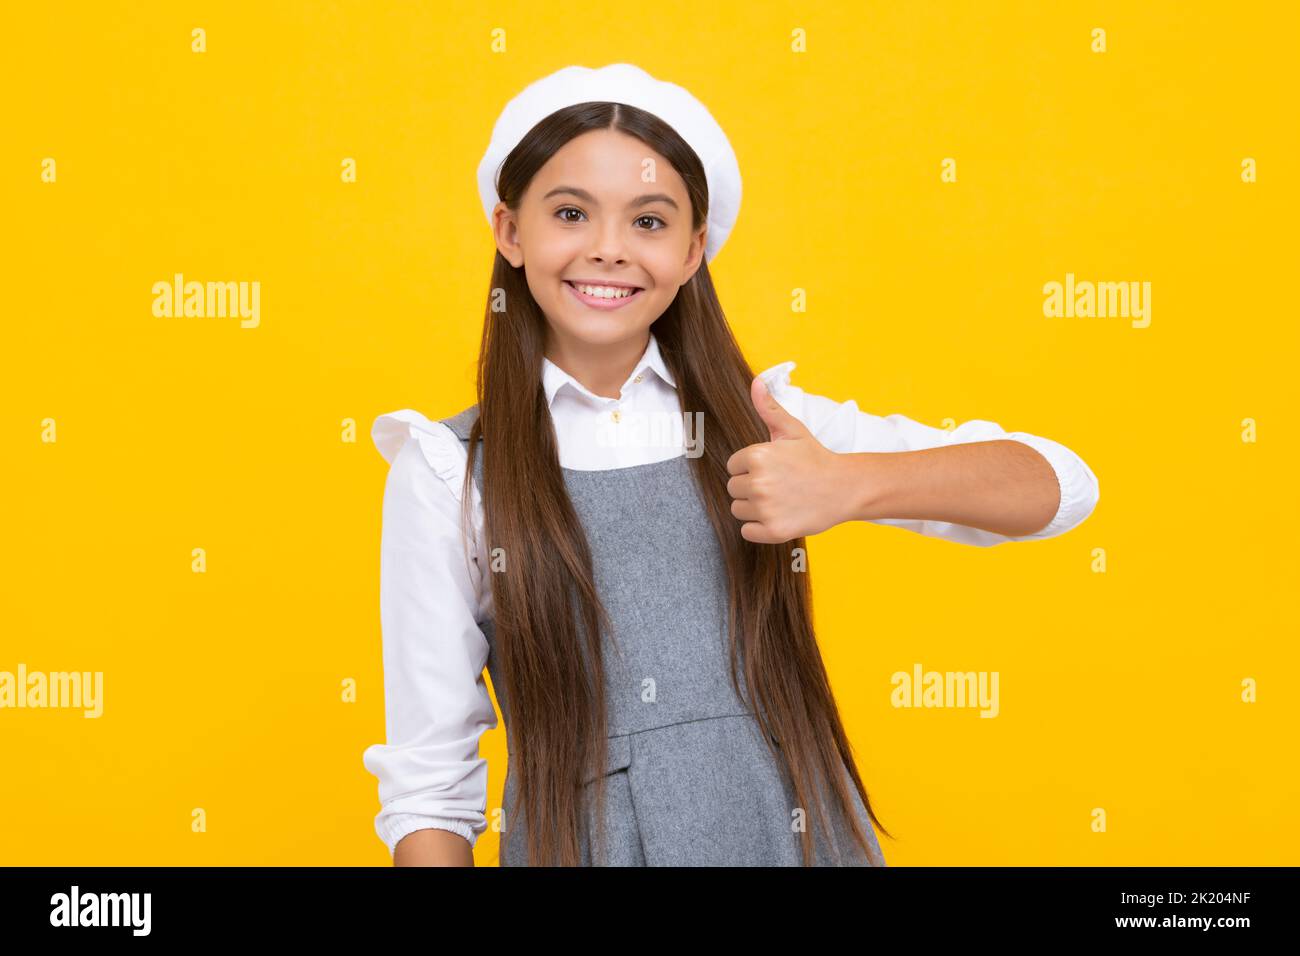 Happy casual teenager child girl showing thumb up and smiling isolated on yellow background. Happy girl face, positive and smiling emotions. Stock Photo